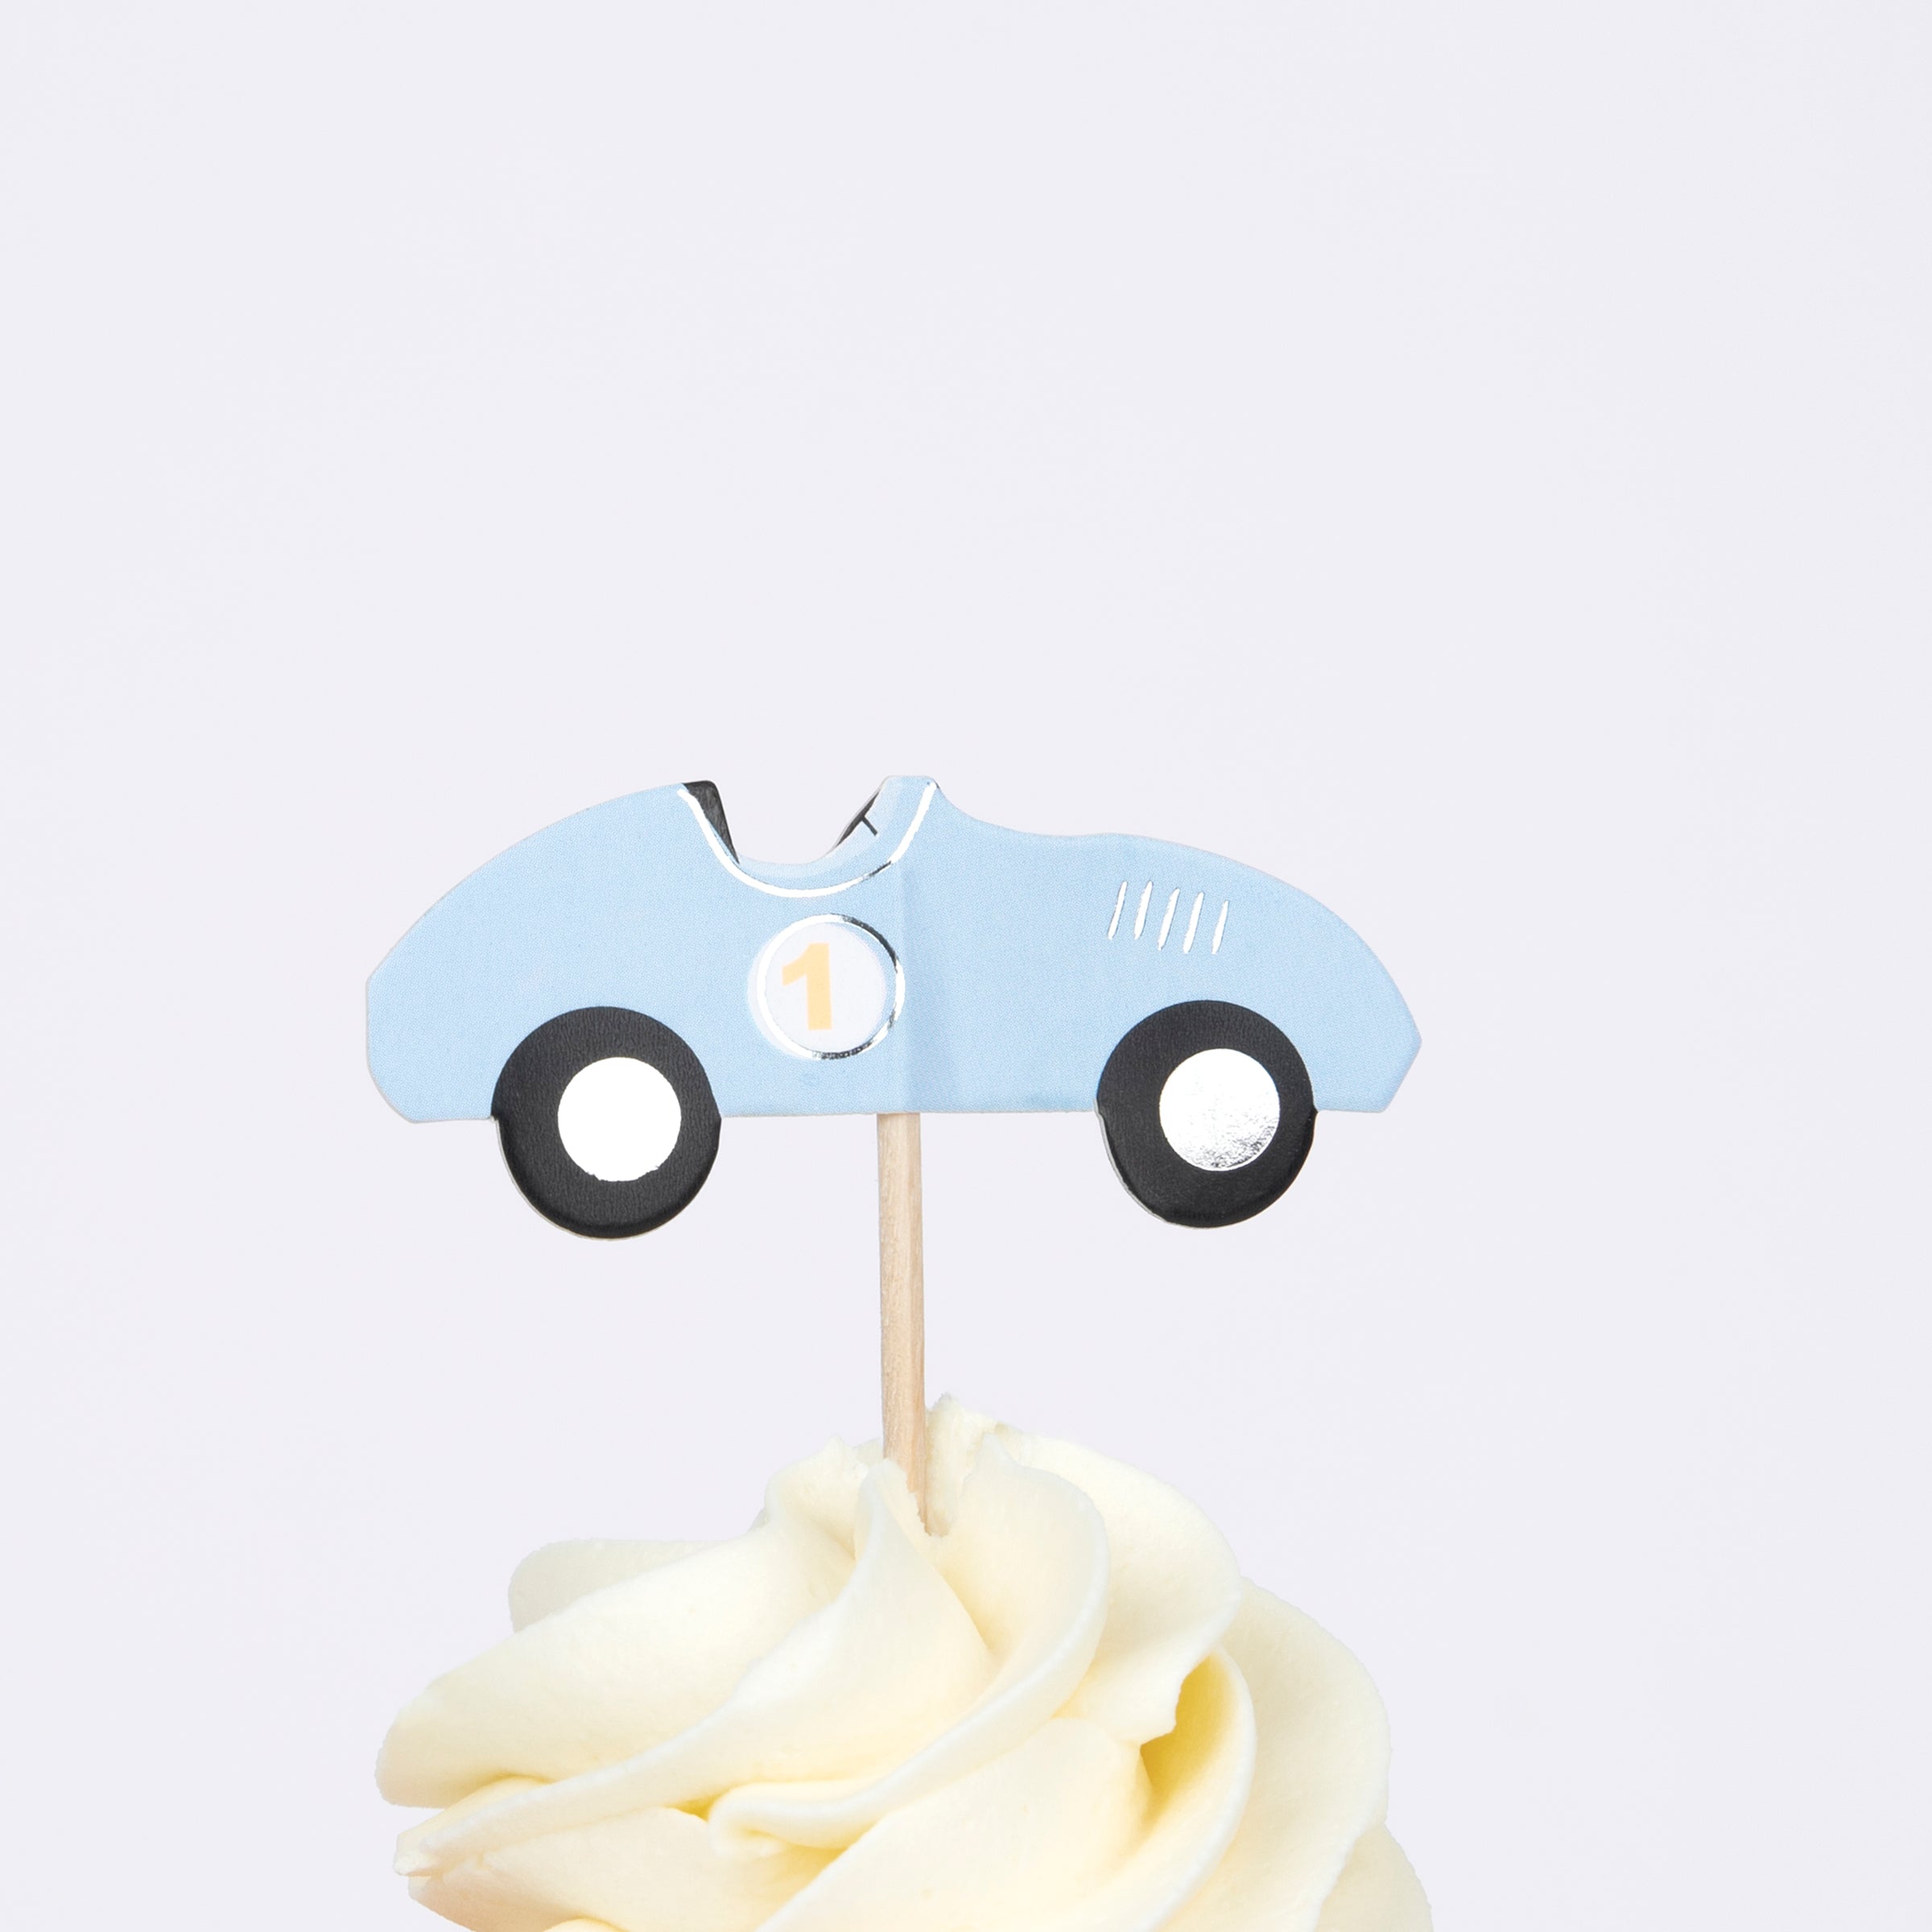 Our race car cupcakes, with car toppers and striped cupcake cases, will look amazing at a race car birthday party.